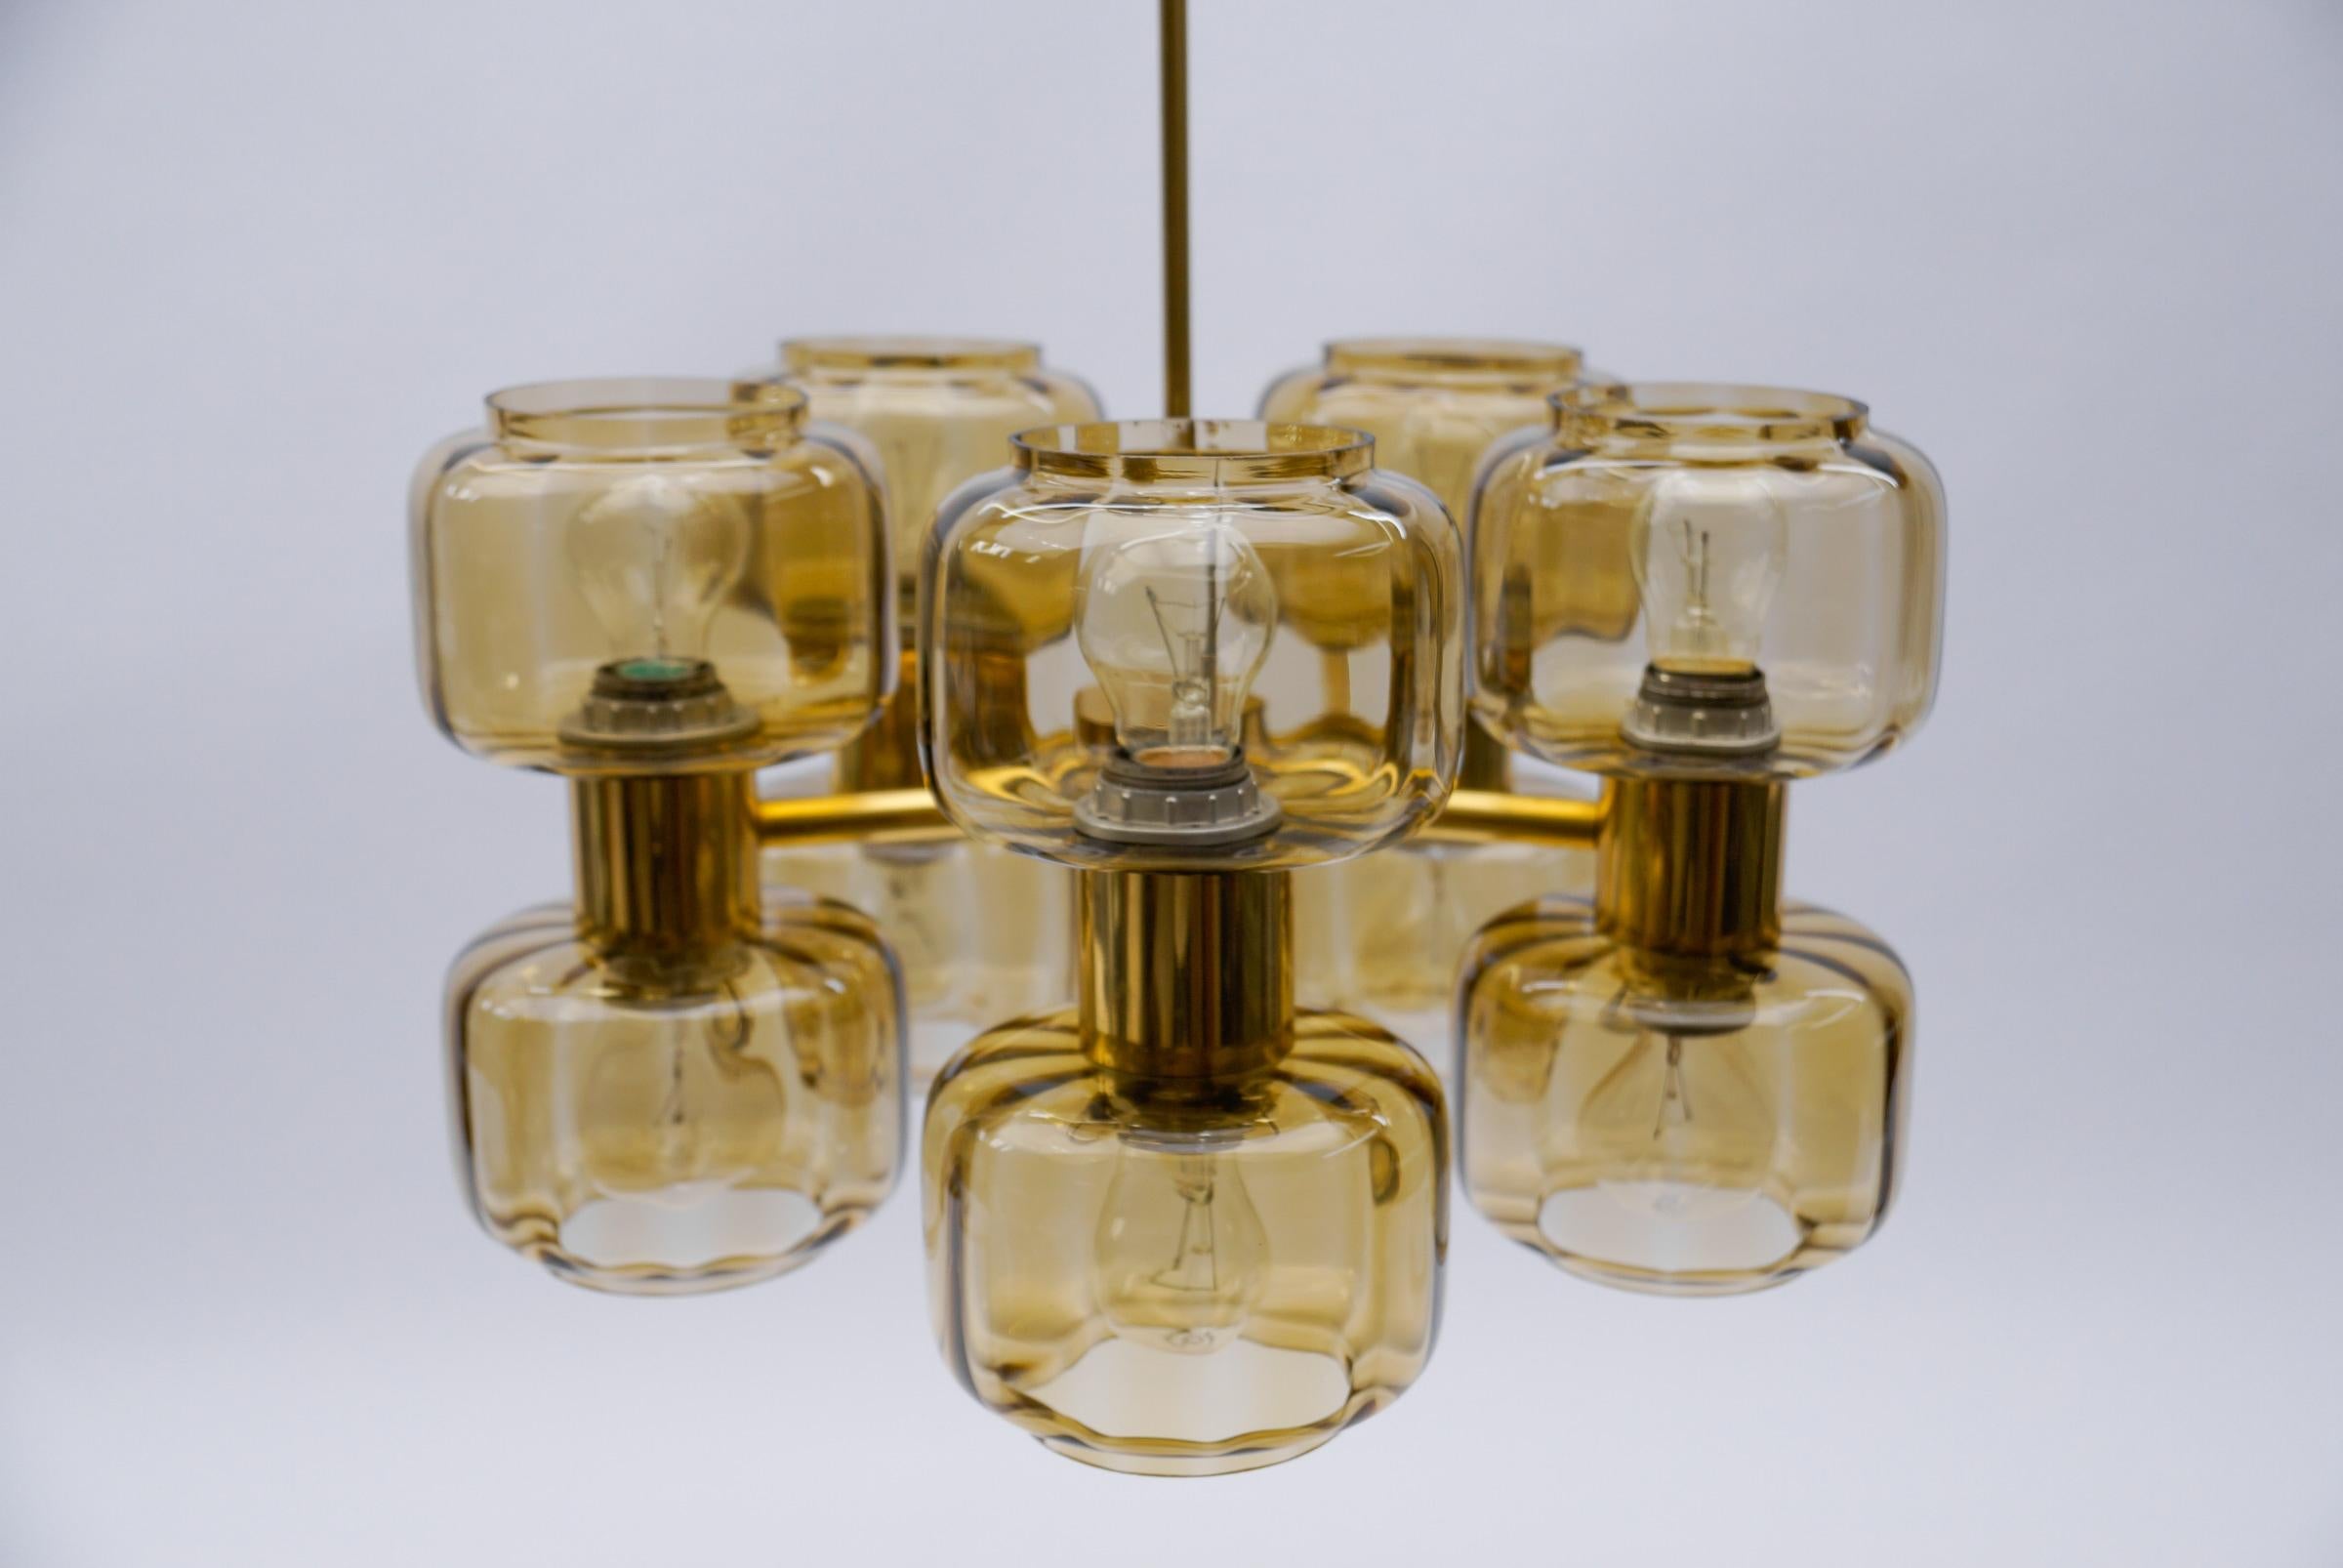 Executed in glass, metal and brass. The lamp needs 10 x E27 / E26 Edison screw fit bulb, is wired, in working condition and runs both on 110 / 230 volt.

Our lamps are checked, cleaned and are suitable for use in the USA.